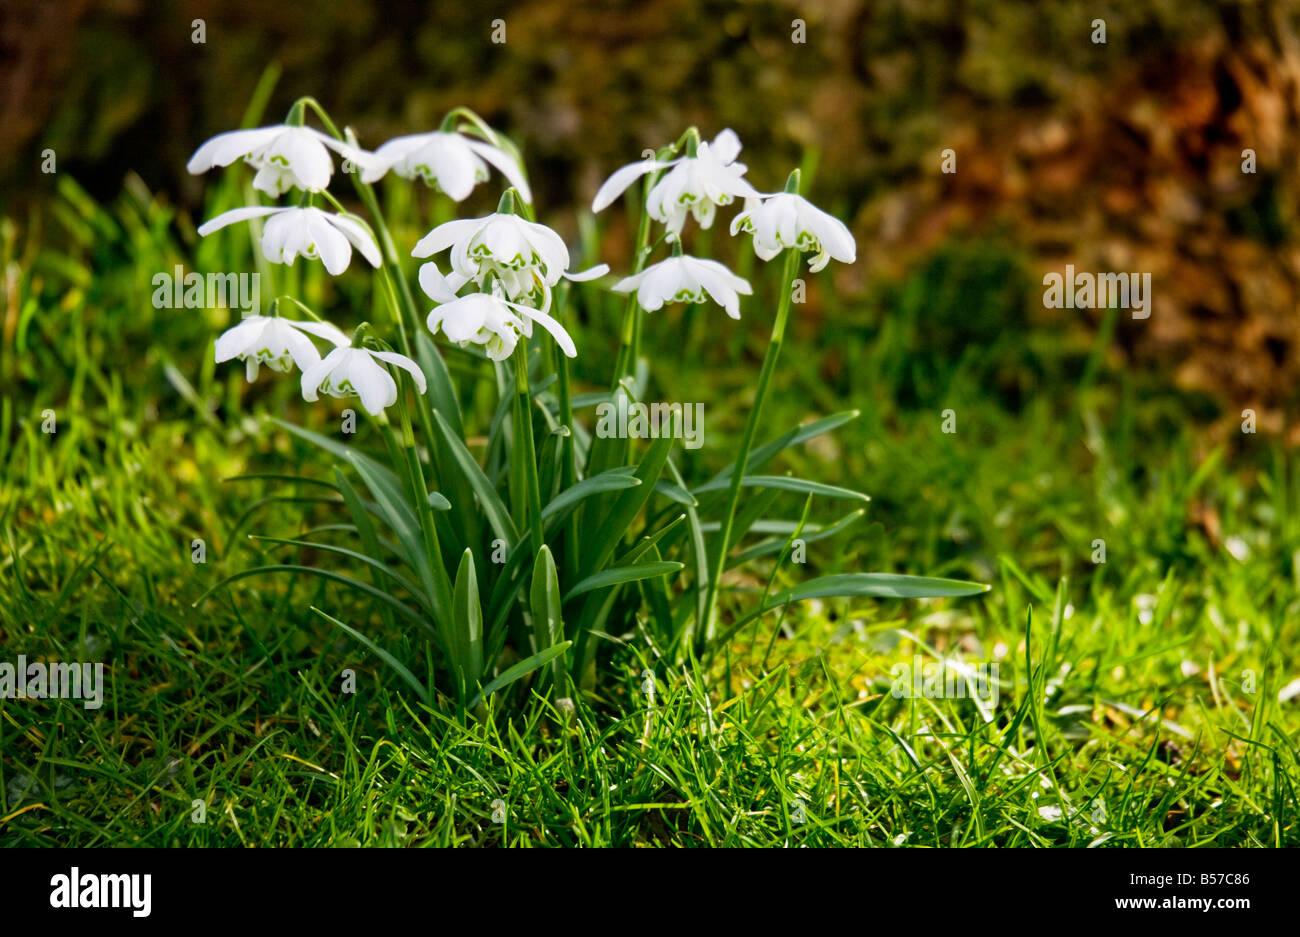 Clump of snowdrops, Galanthus nivalis growing in the grass at the base of a tree in early spring in England, UK Stock Photo